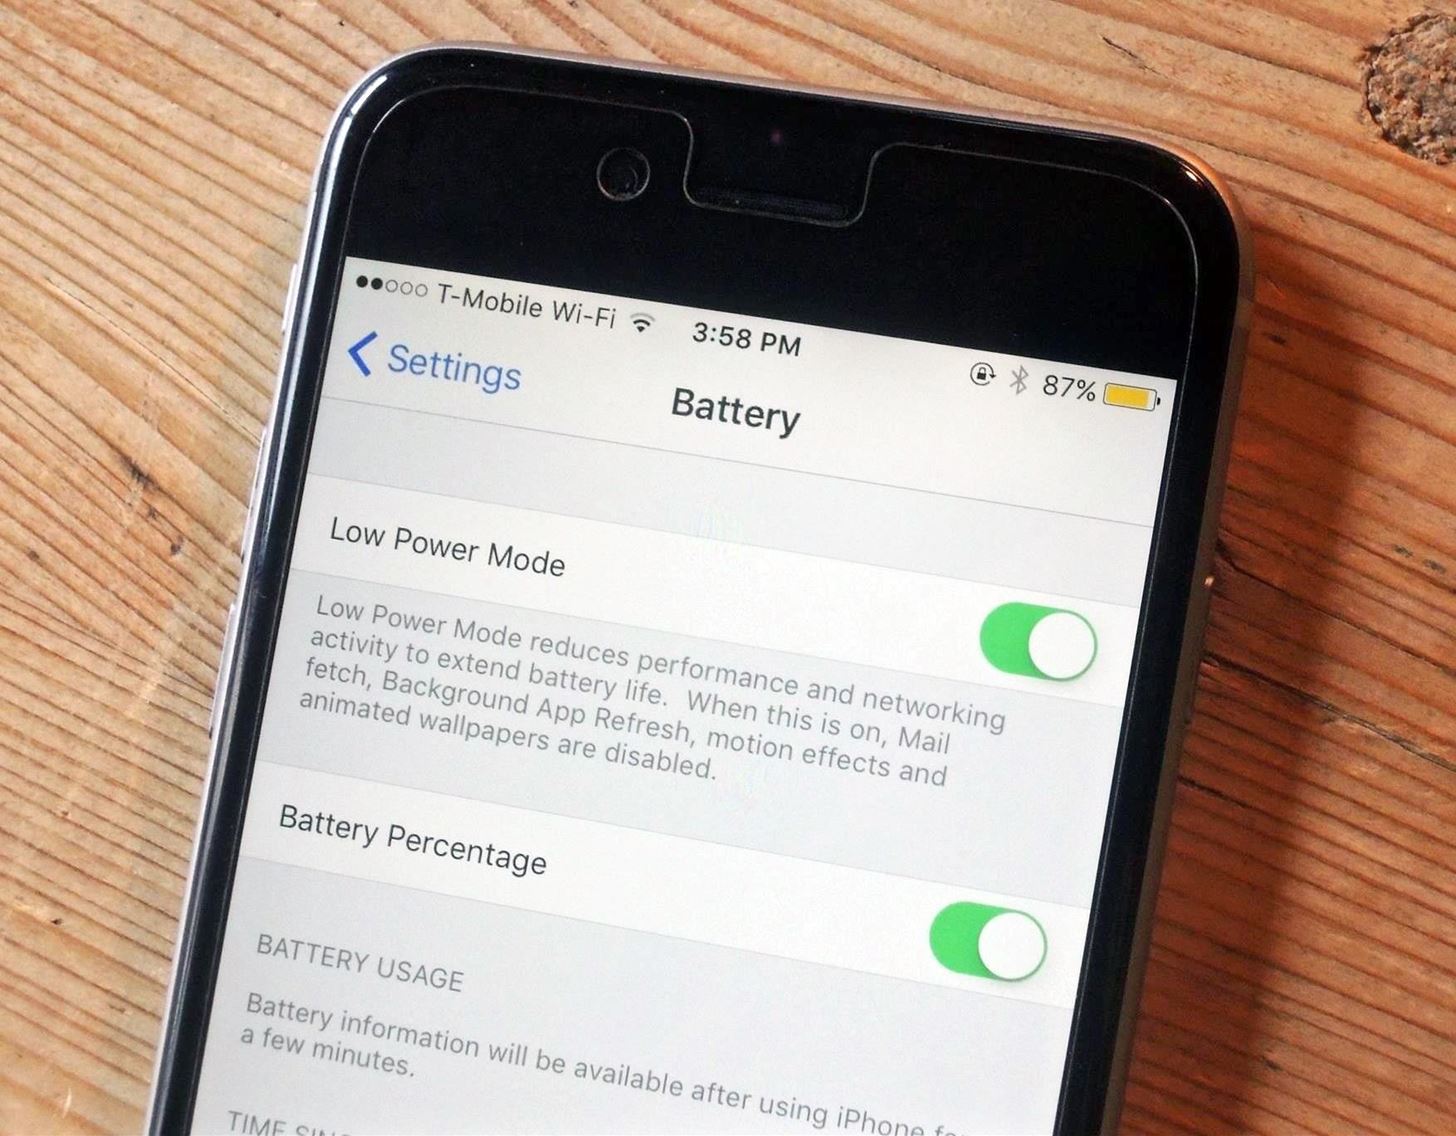 Extend Your iPhone's Battery Life by 3 Hours Using Low Power Mode in iOS 9